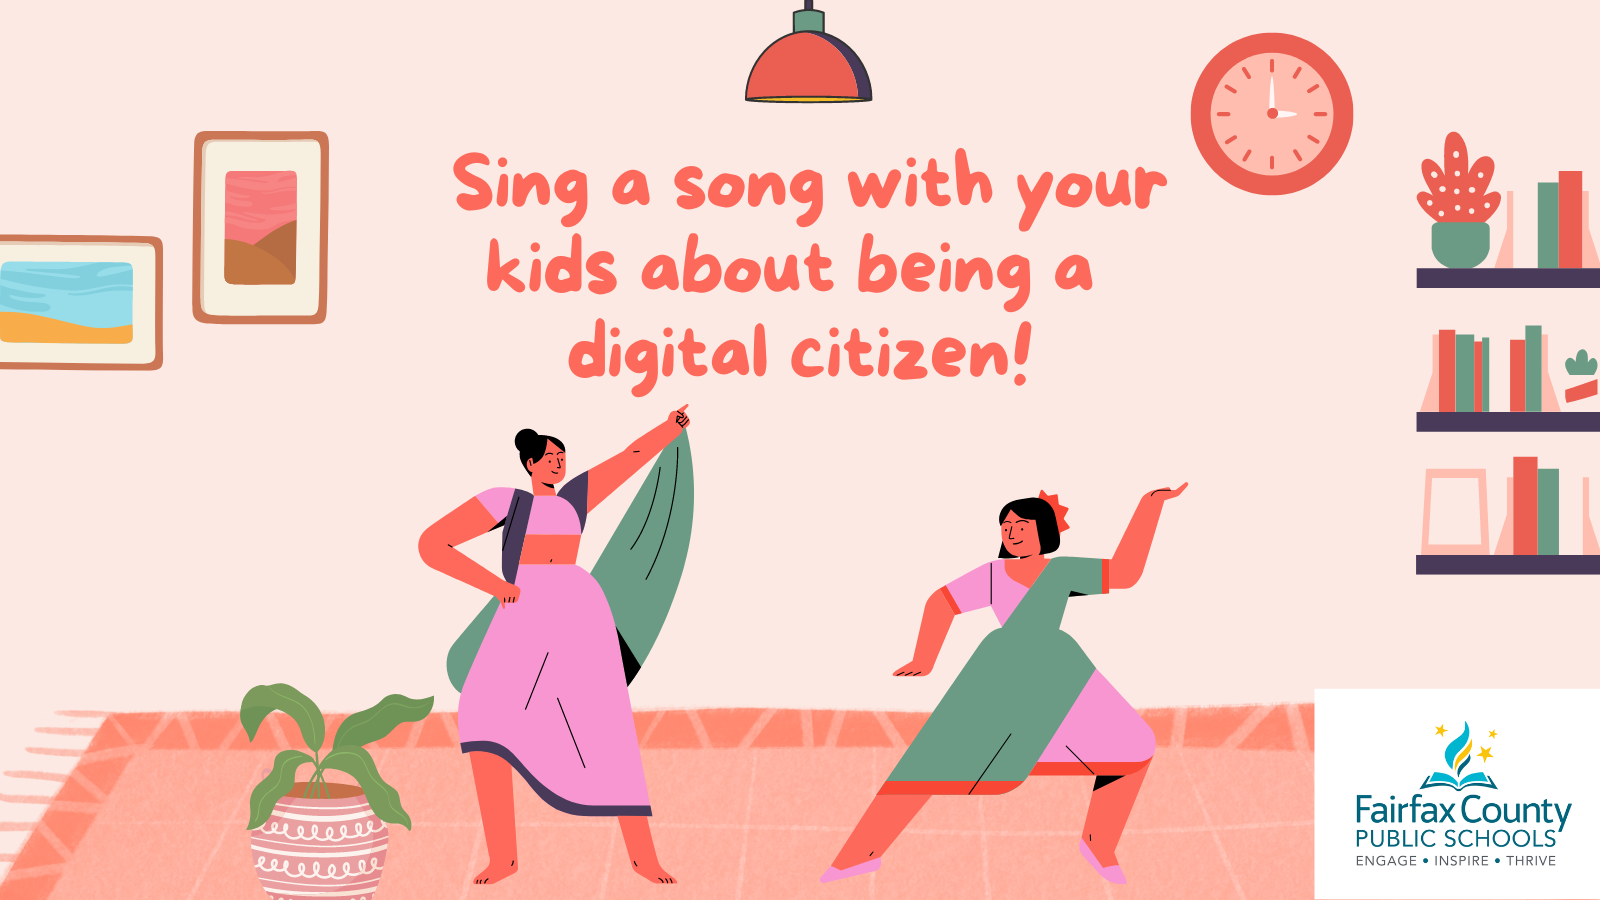 Tuesday's Lesson song a song about Digital Citizen